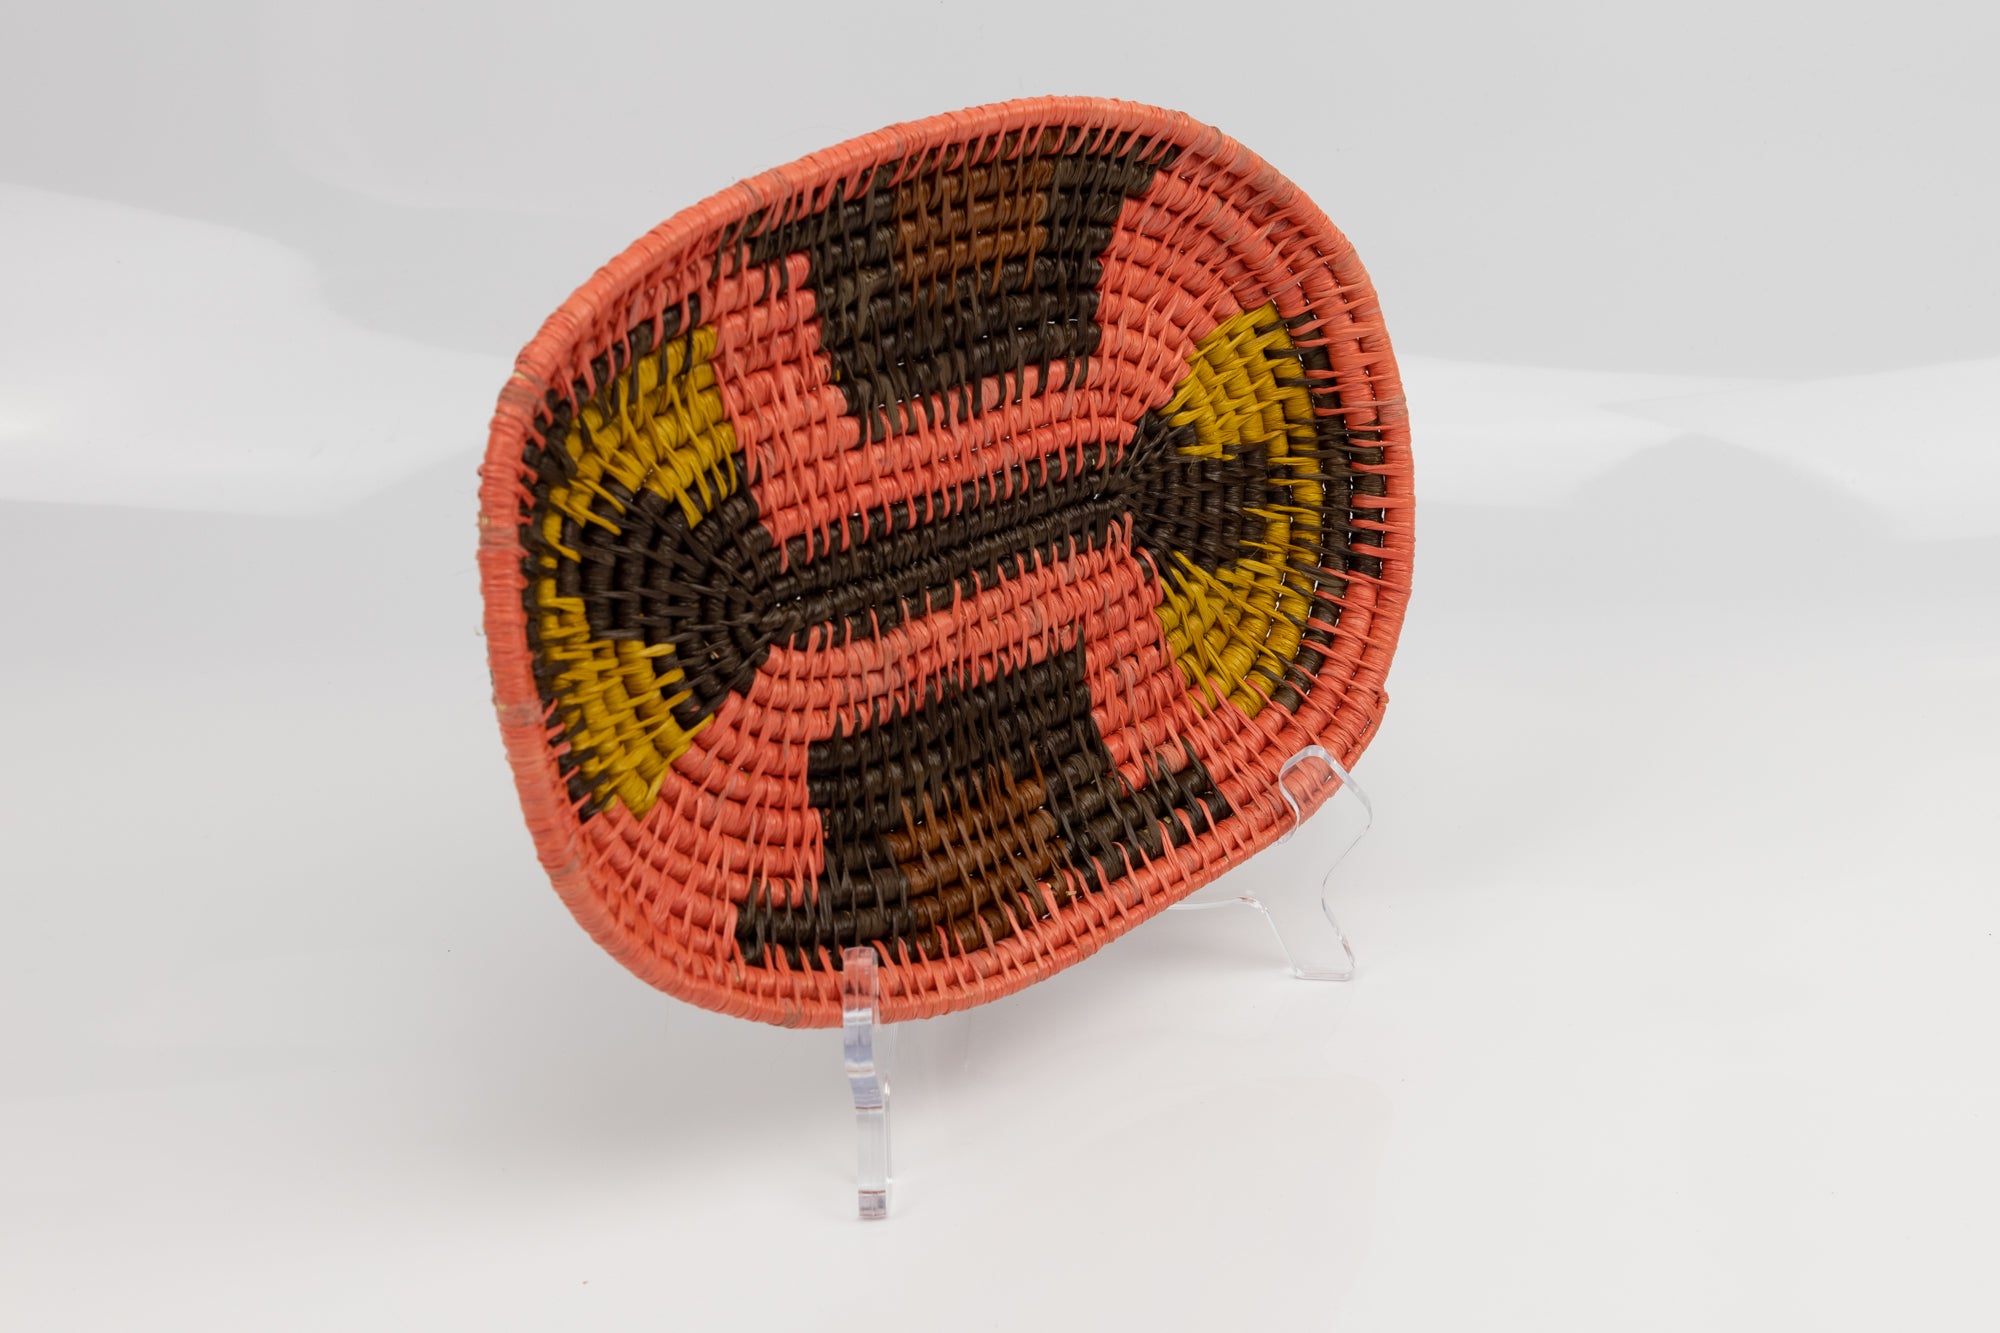 Woven Vintage Plate Basket Made By Indigenous Artisans